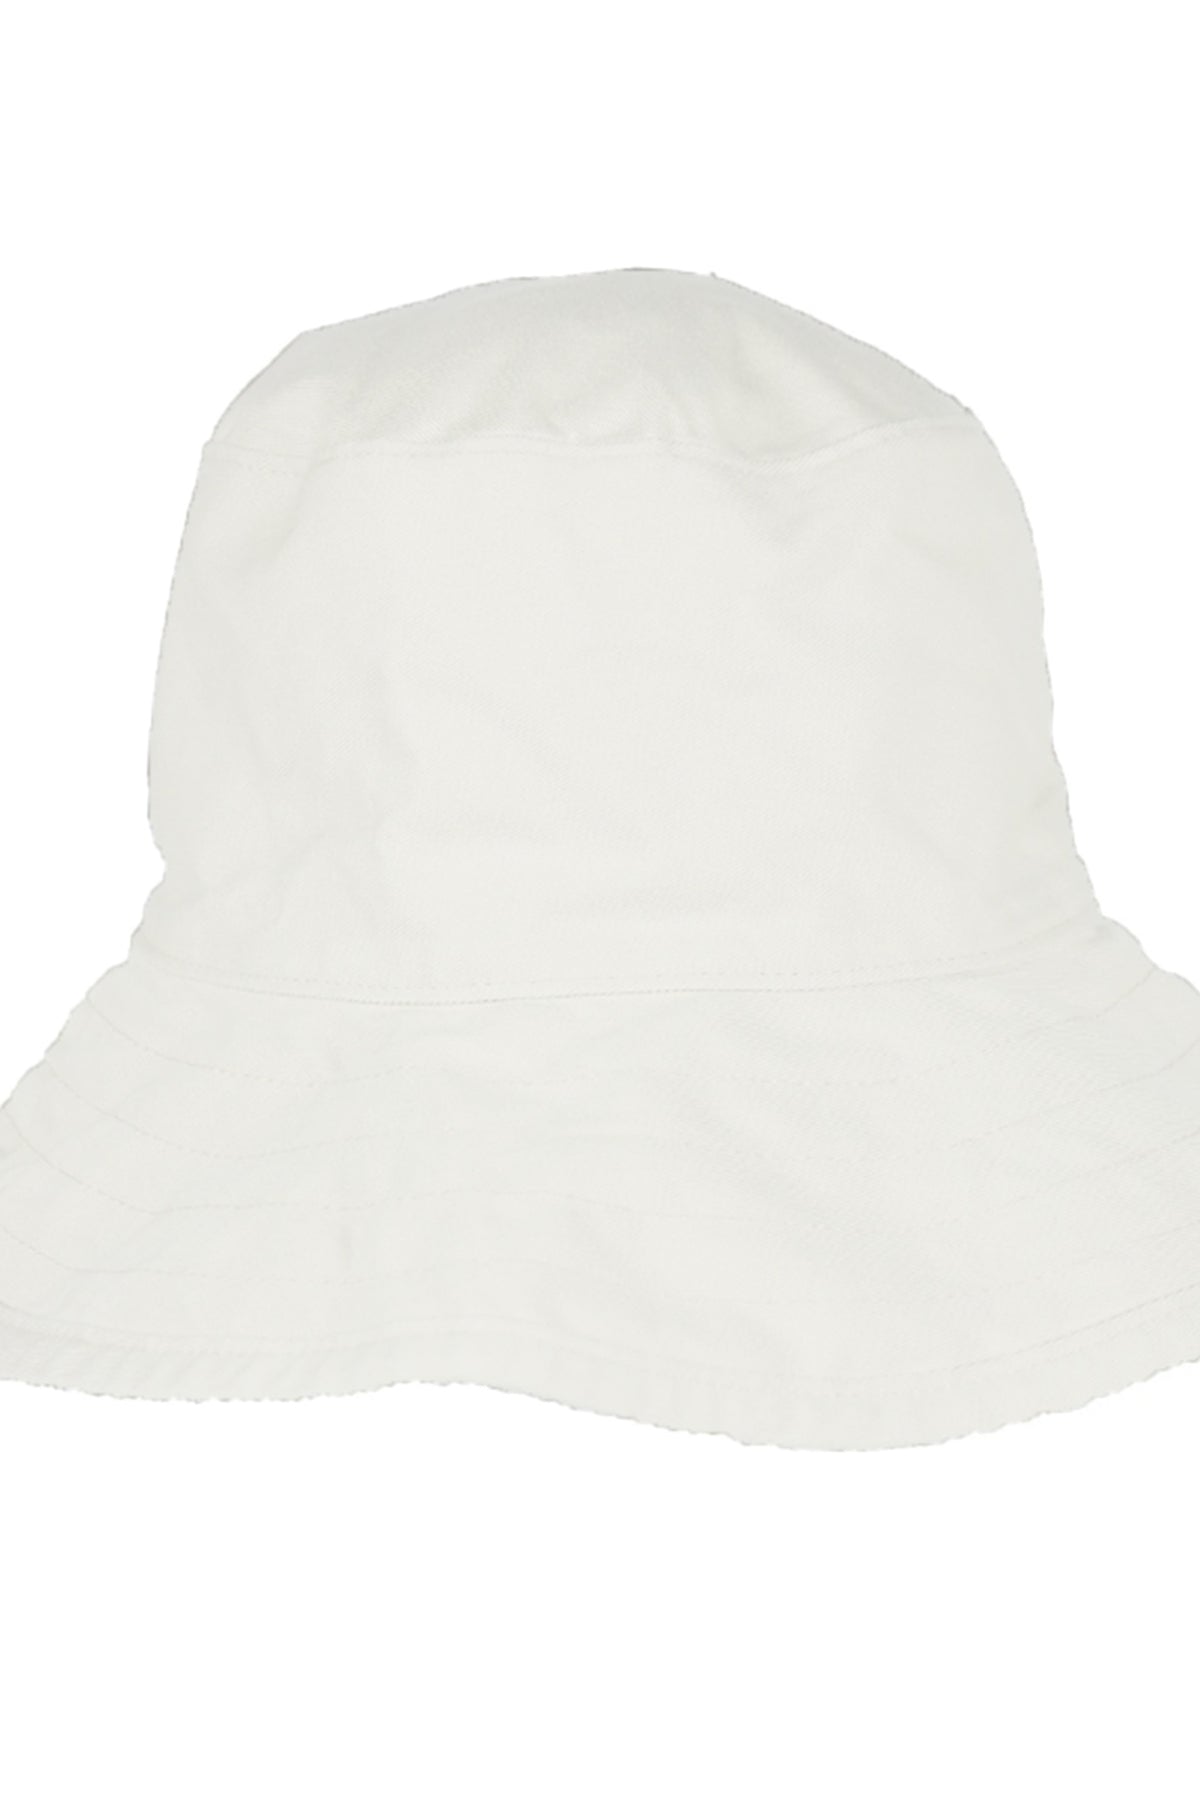 a Velvet by Graham & Spencer WASHED COTTON CRUSHER HAT on a white background.-26184417345729